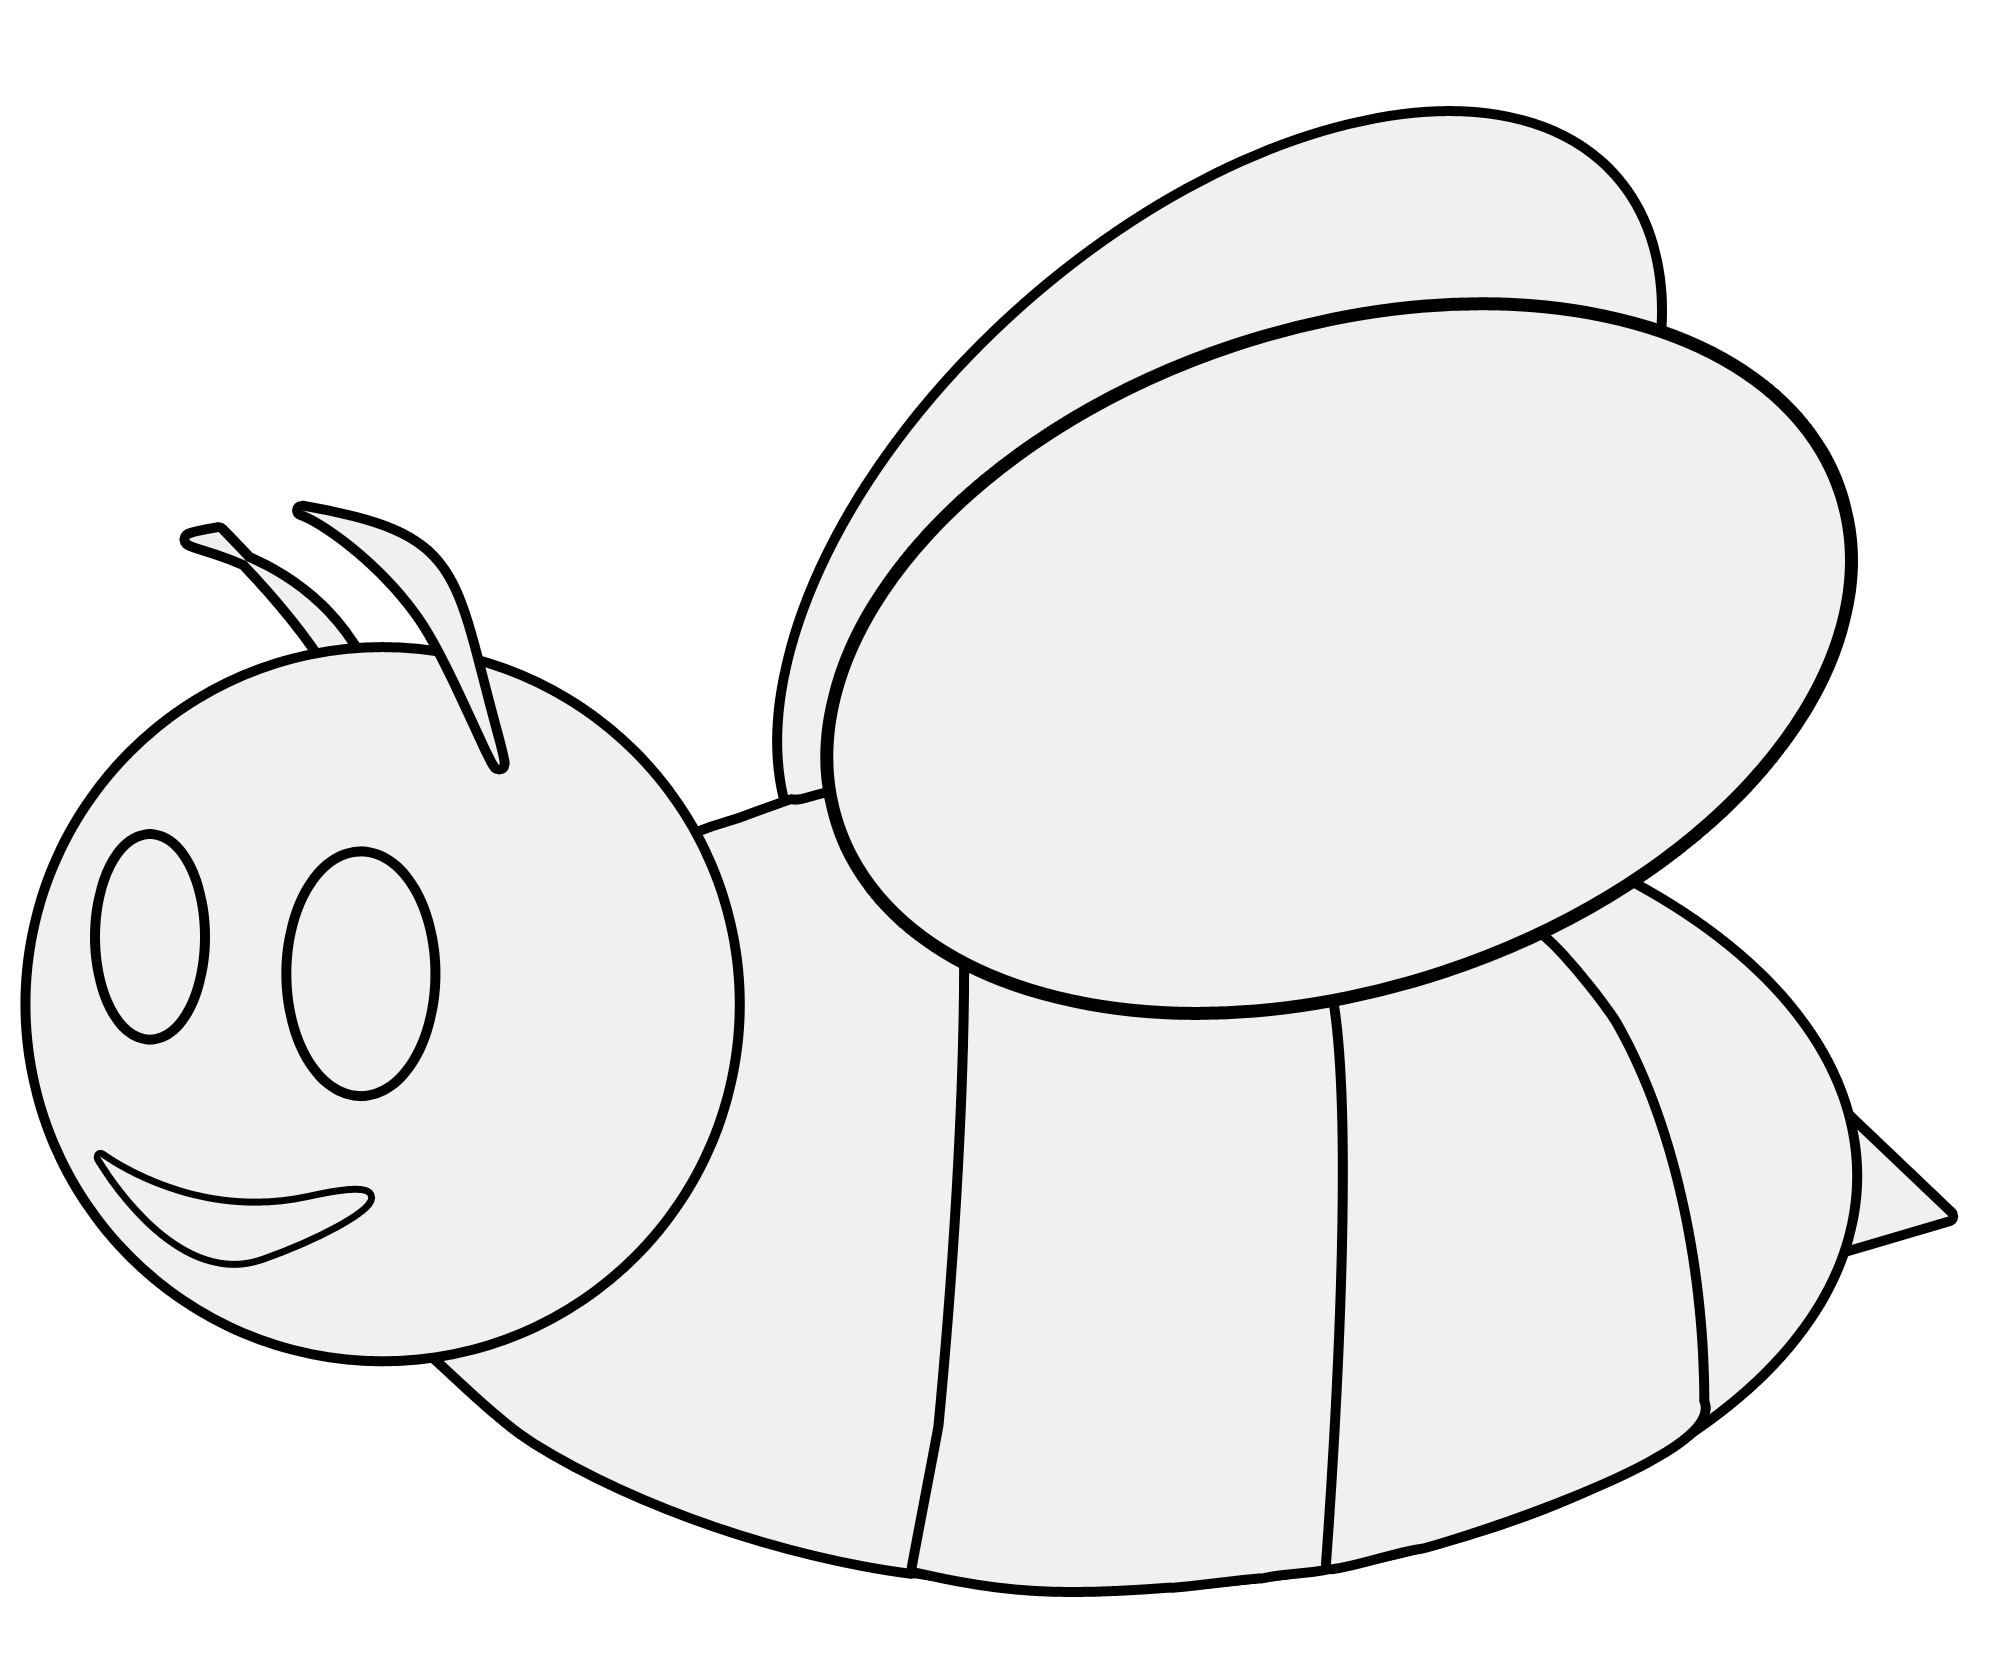 free-bumble-bee-outline-download-free-bumble-bee-outline-png-images-free-cliparts-on-clipart